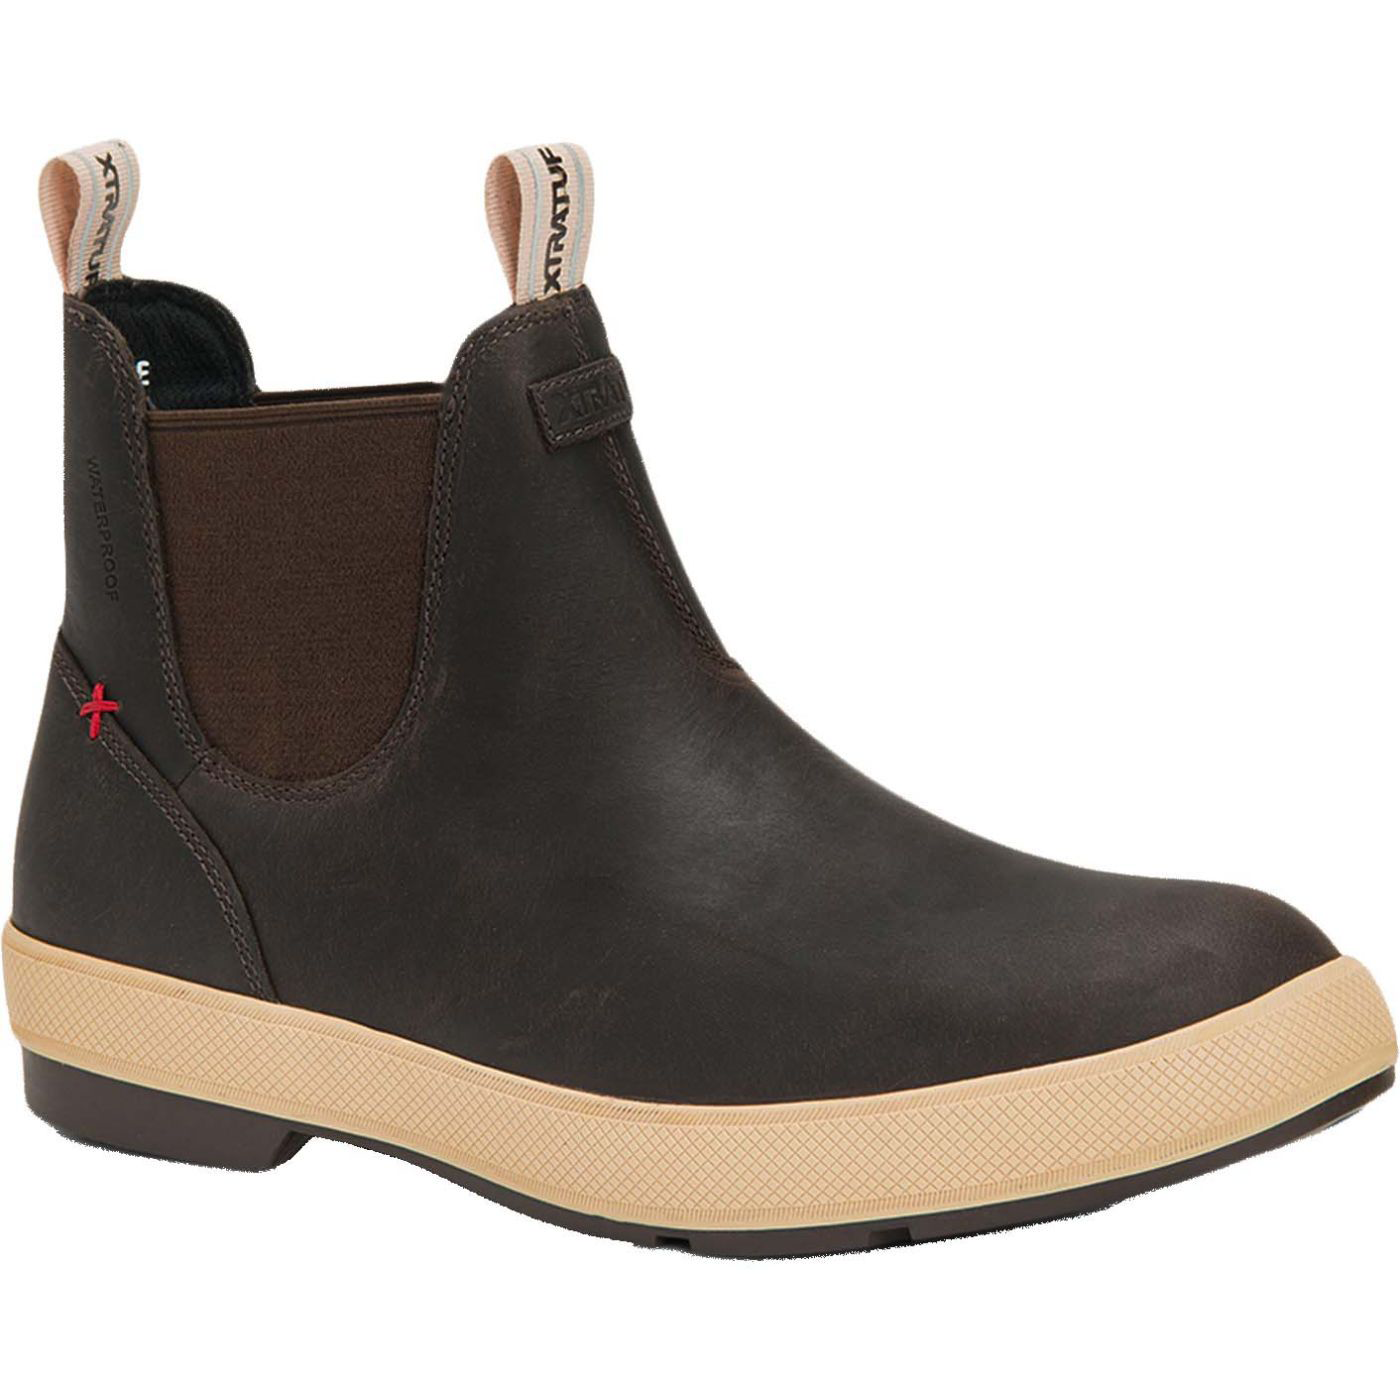 Xtratuf Legacy Leather Chelsea Boots for Men - Brown - 7M